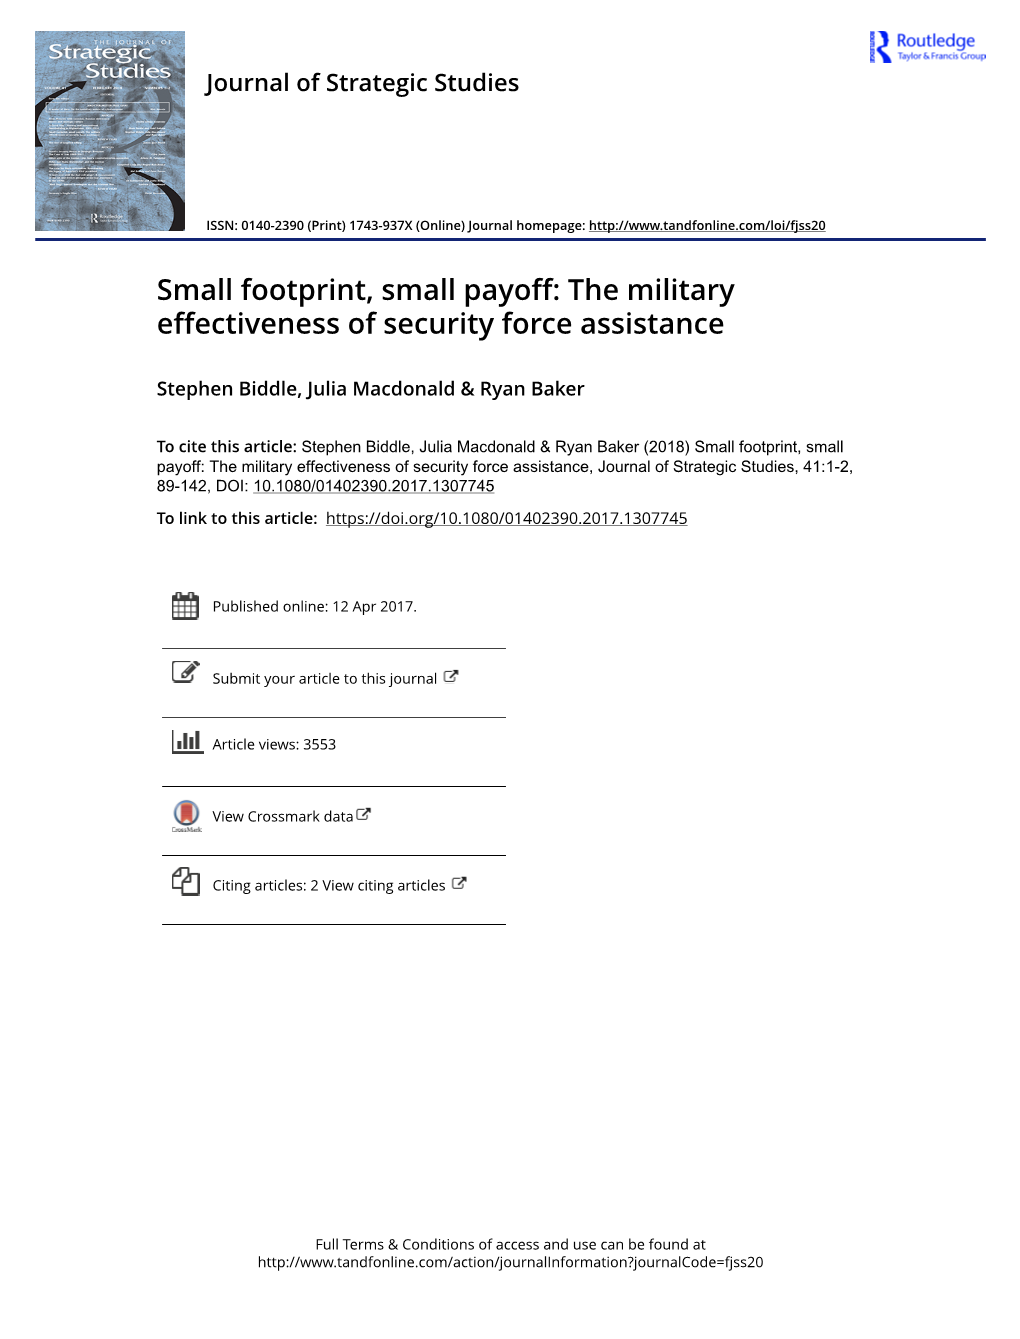 The Military Effectiveness of Security Force Assistance